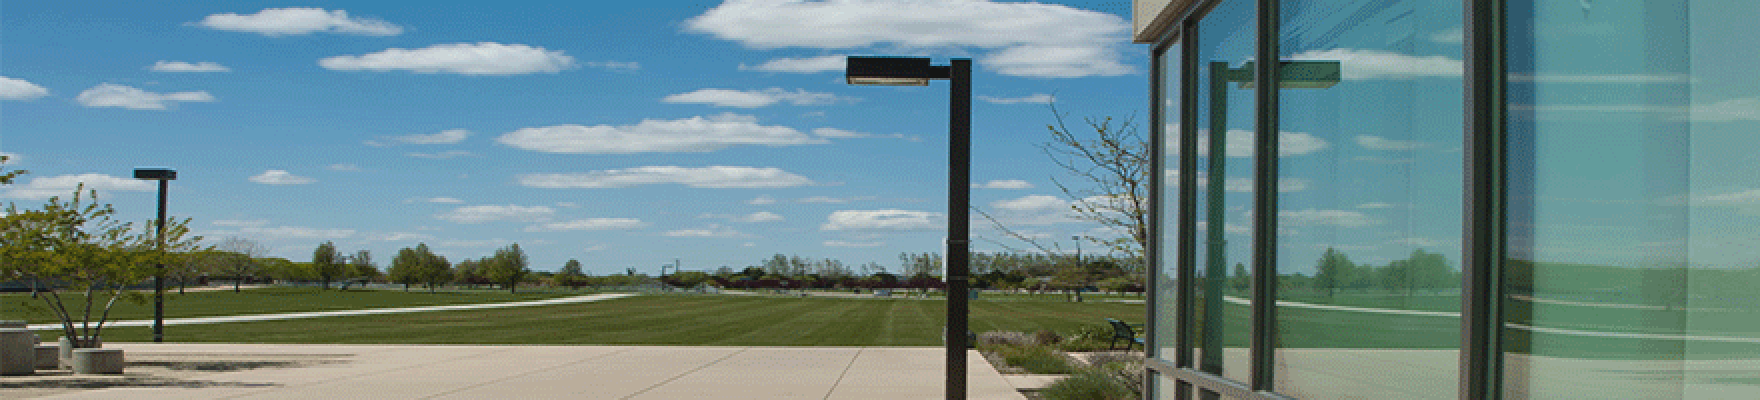 View of grass field from the front of the Nampa Academic Building